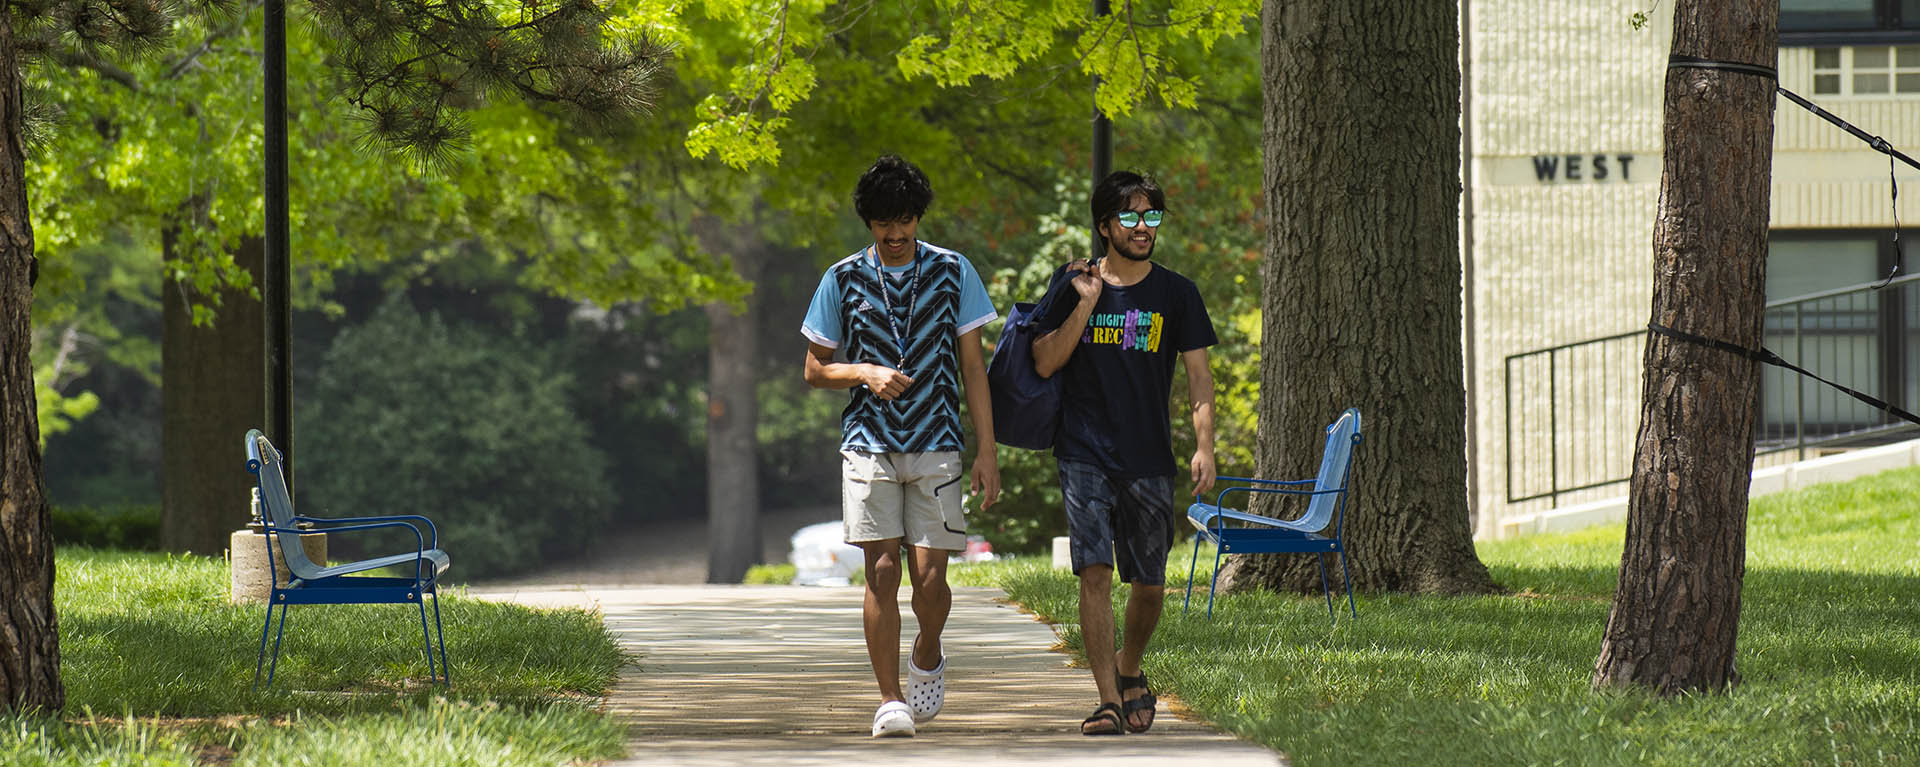 Two students smile and chat while carrying laundry as they walk across campus on an early summer day.